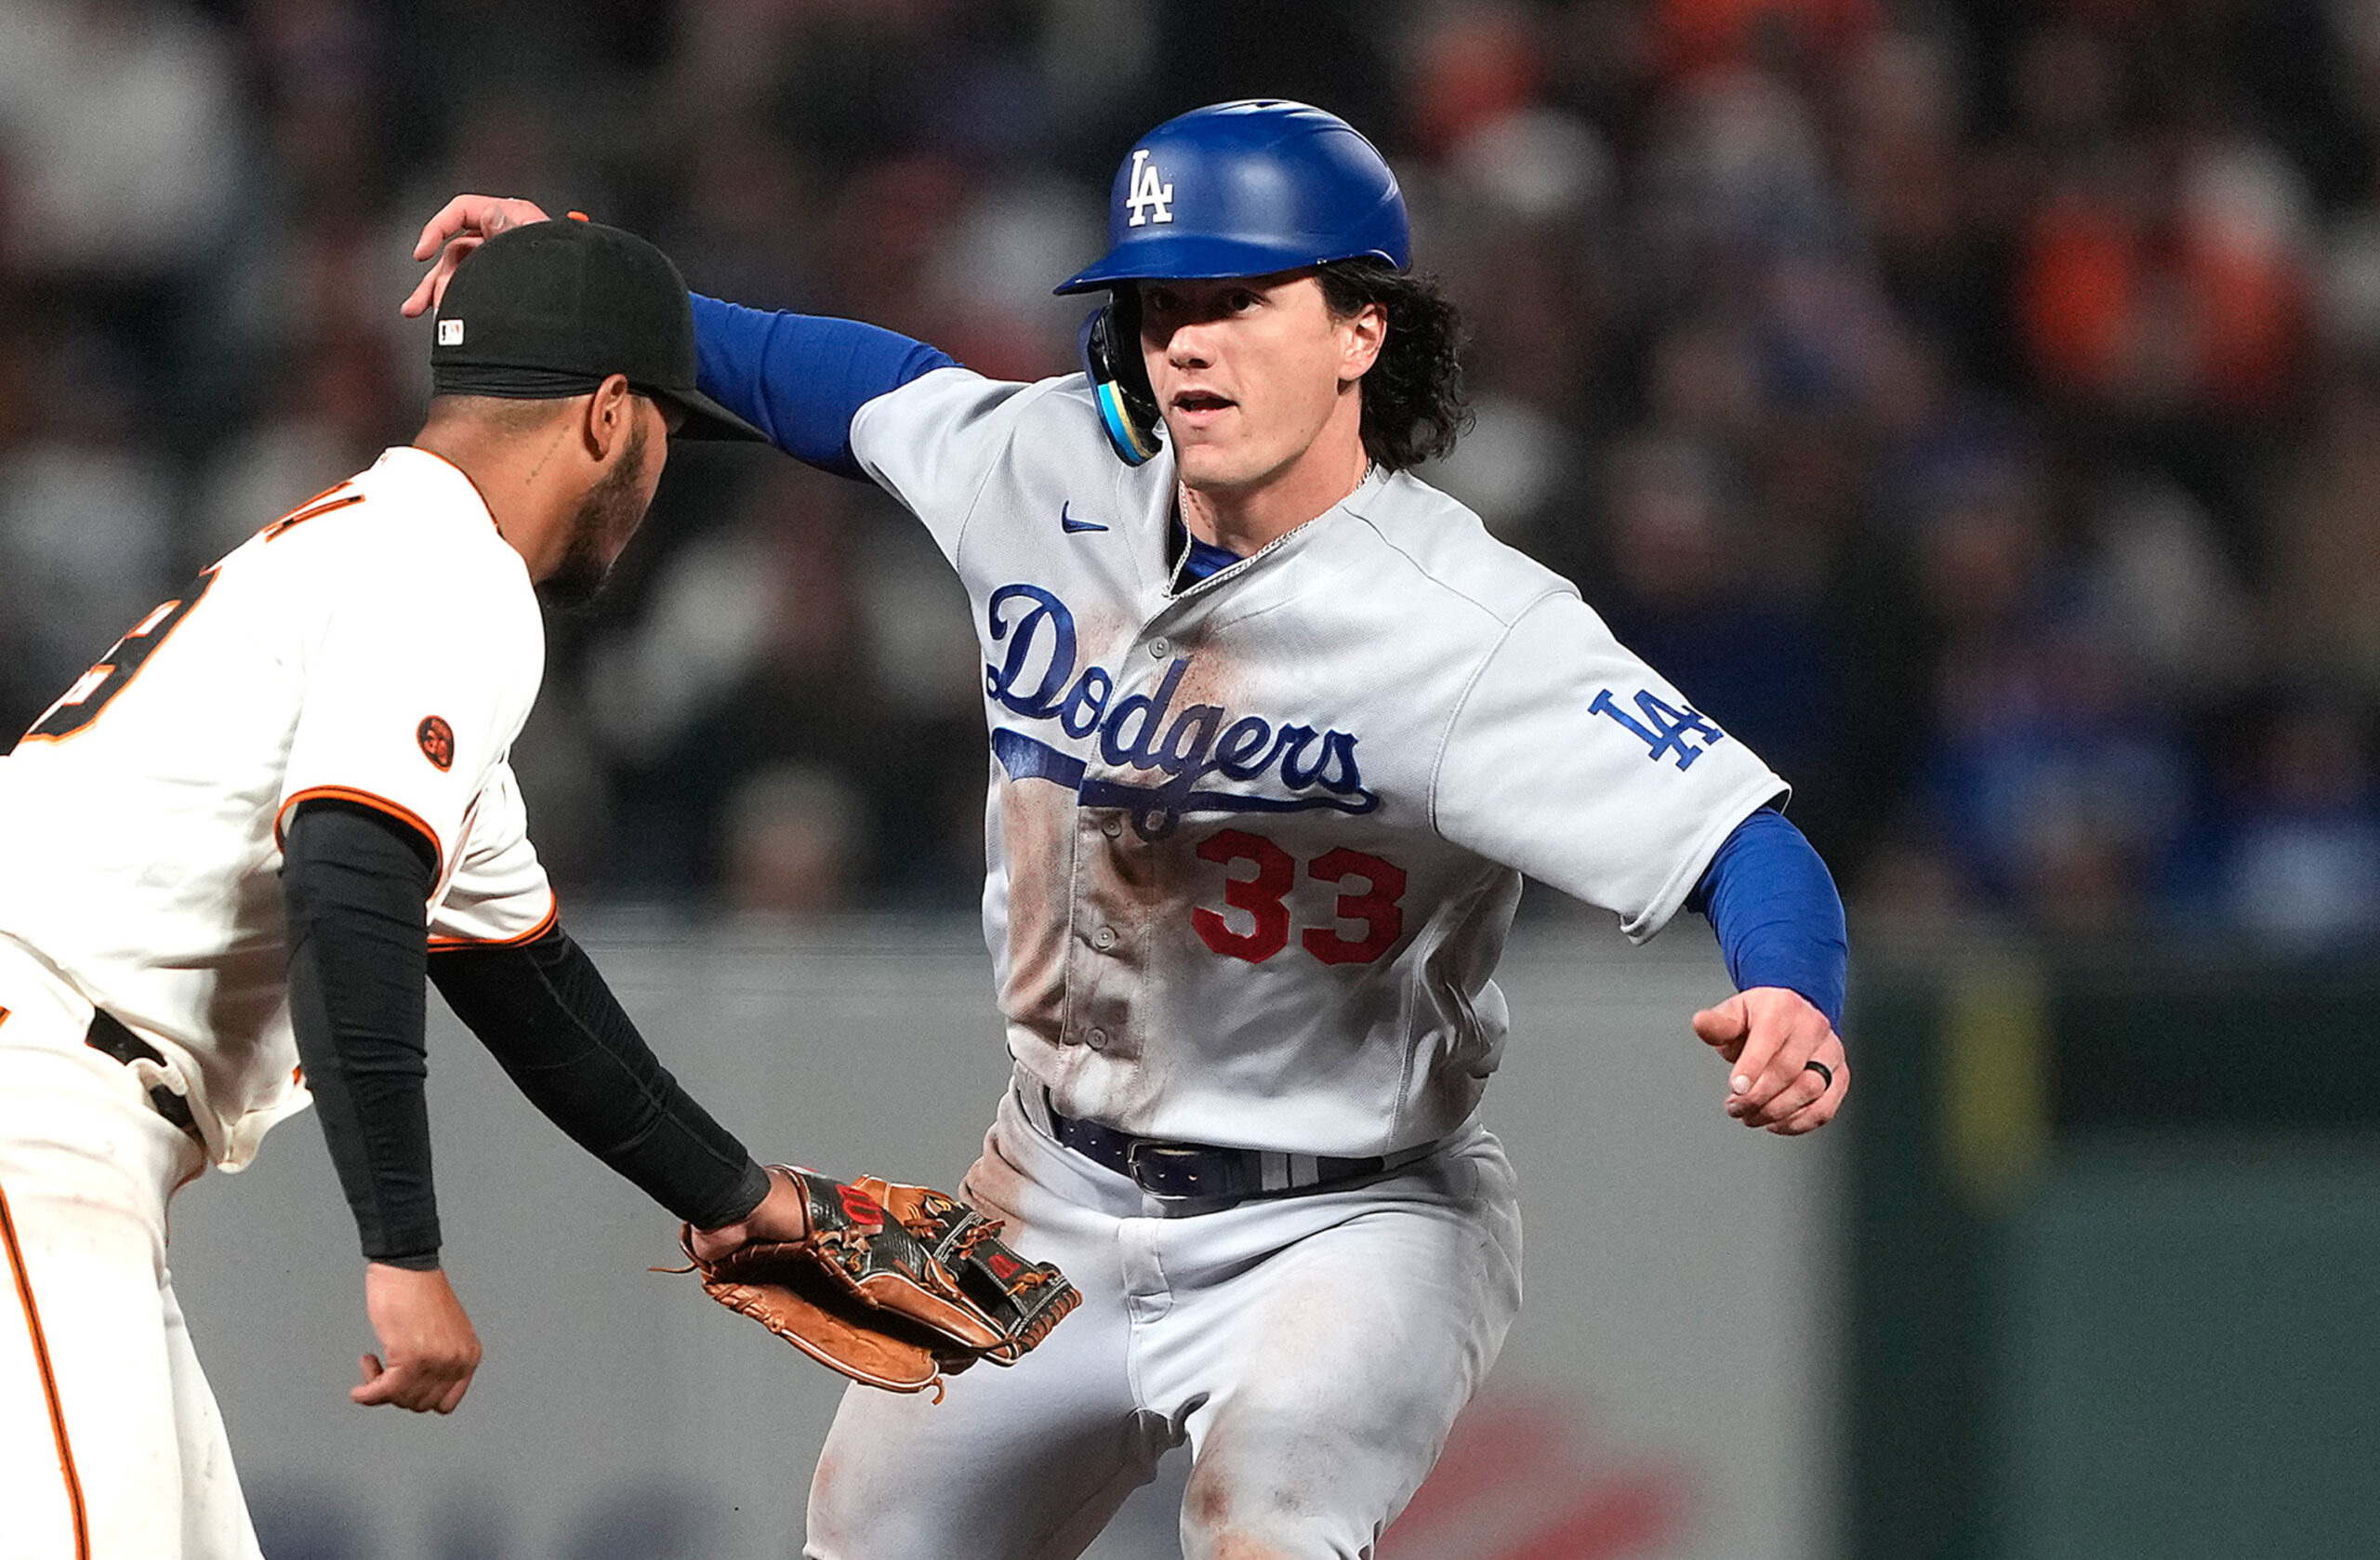 SF Giants Fan Turned Dodger Now Leads MLB in This Key Stat